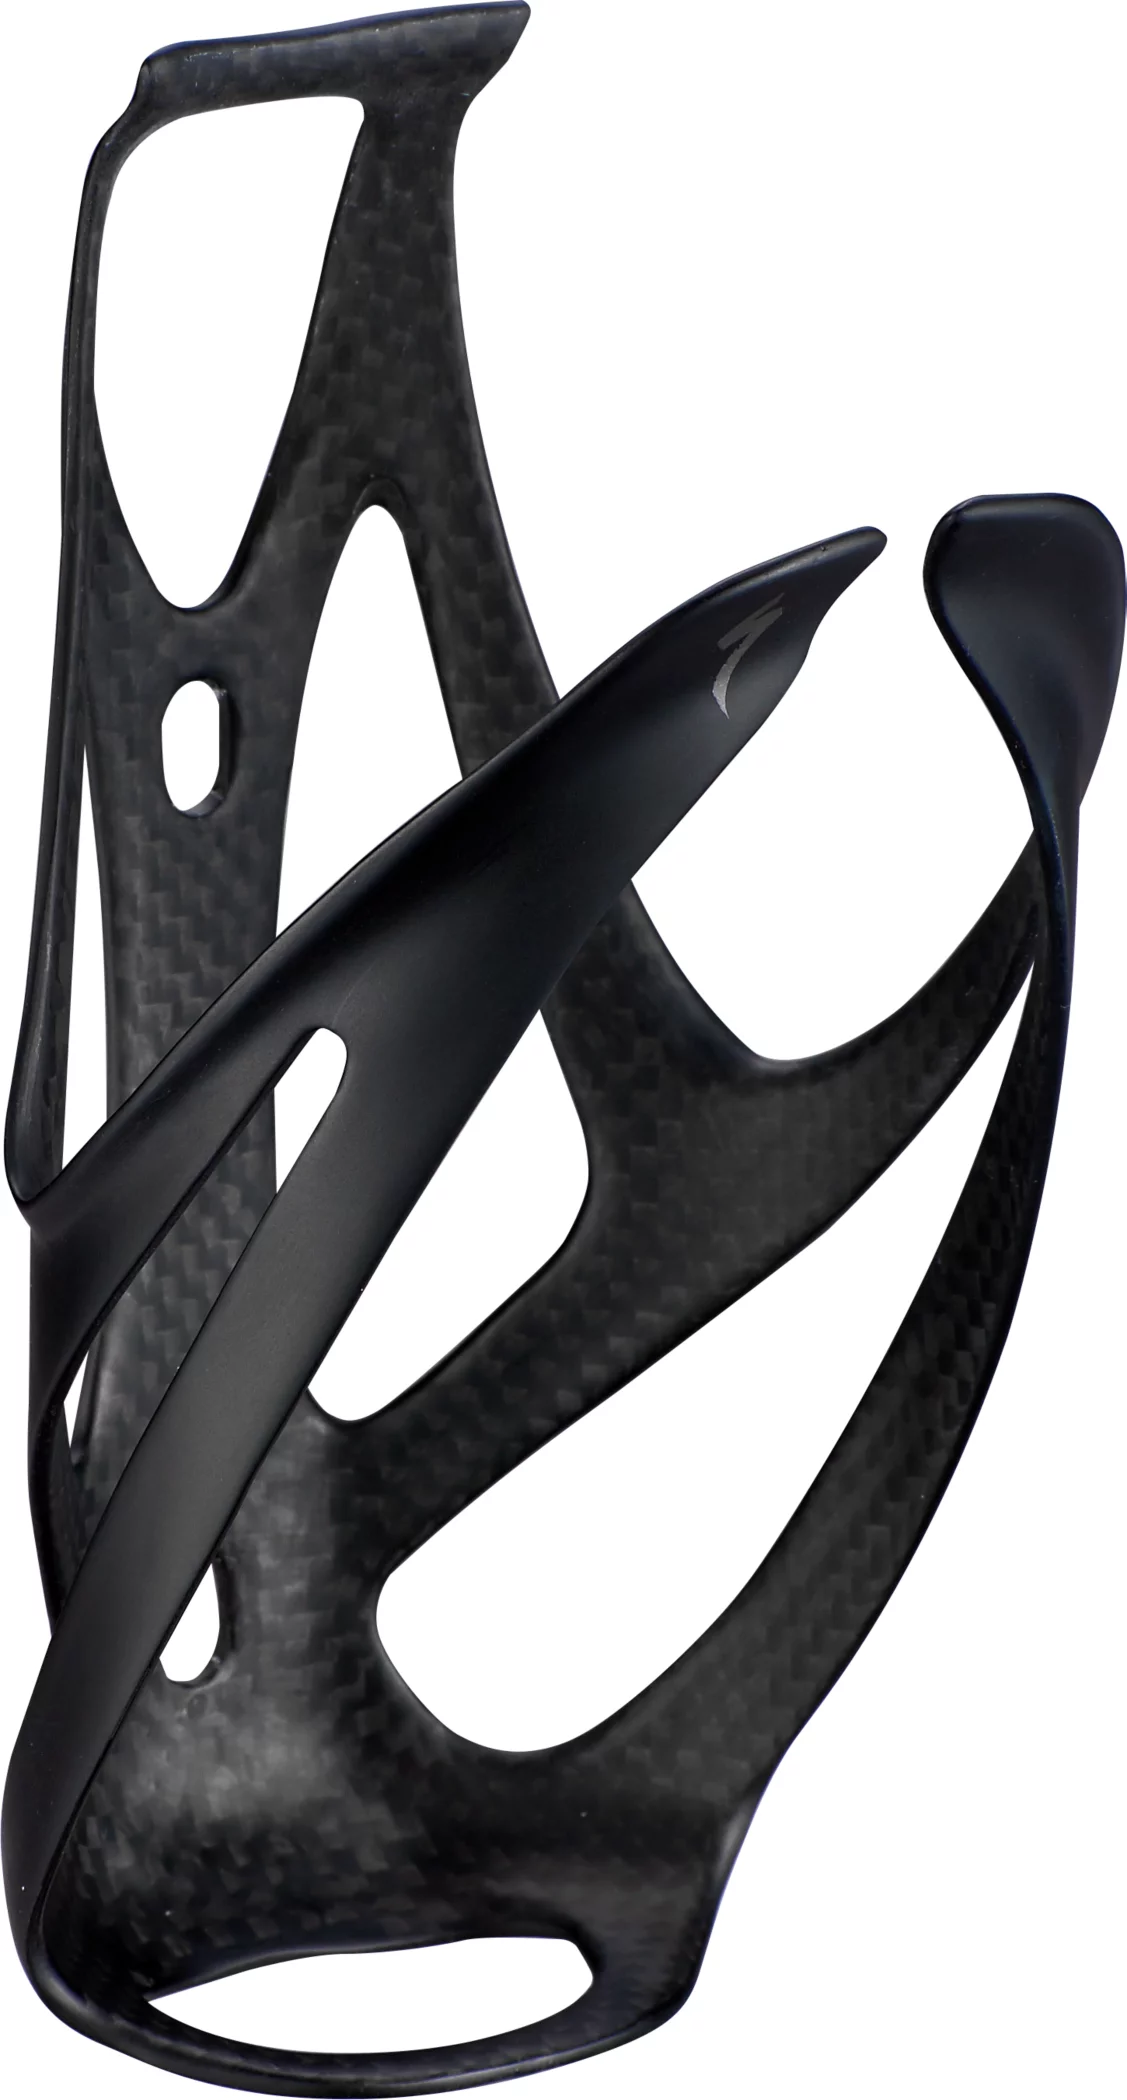 S-Works_Carbon_Rib_Cage_III